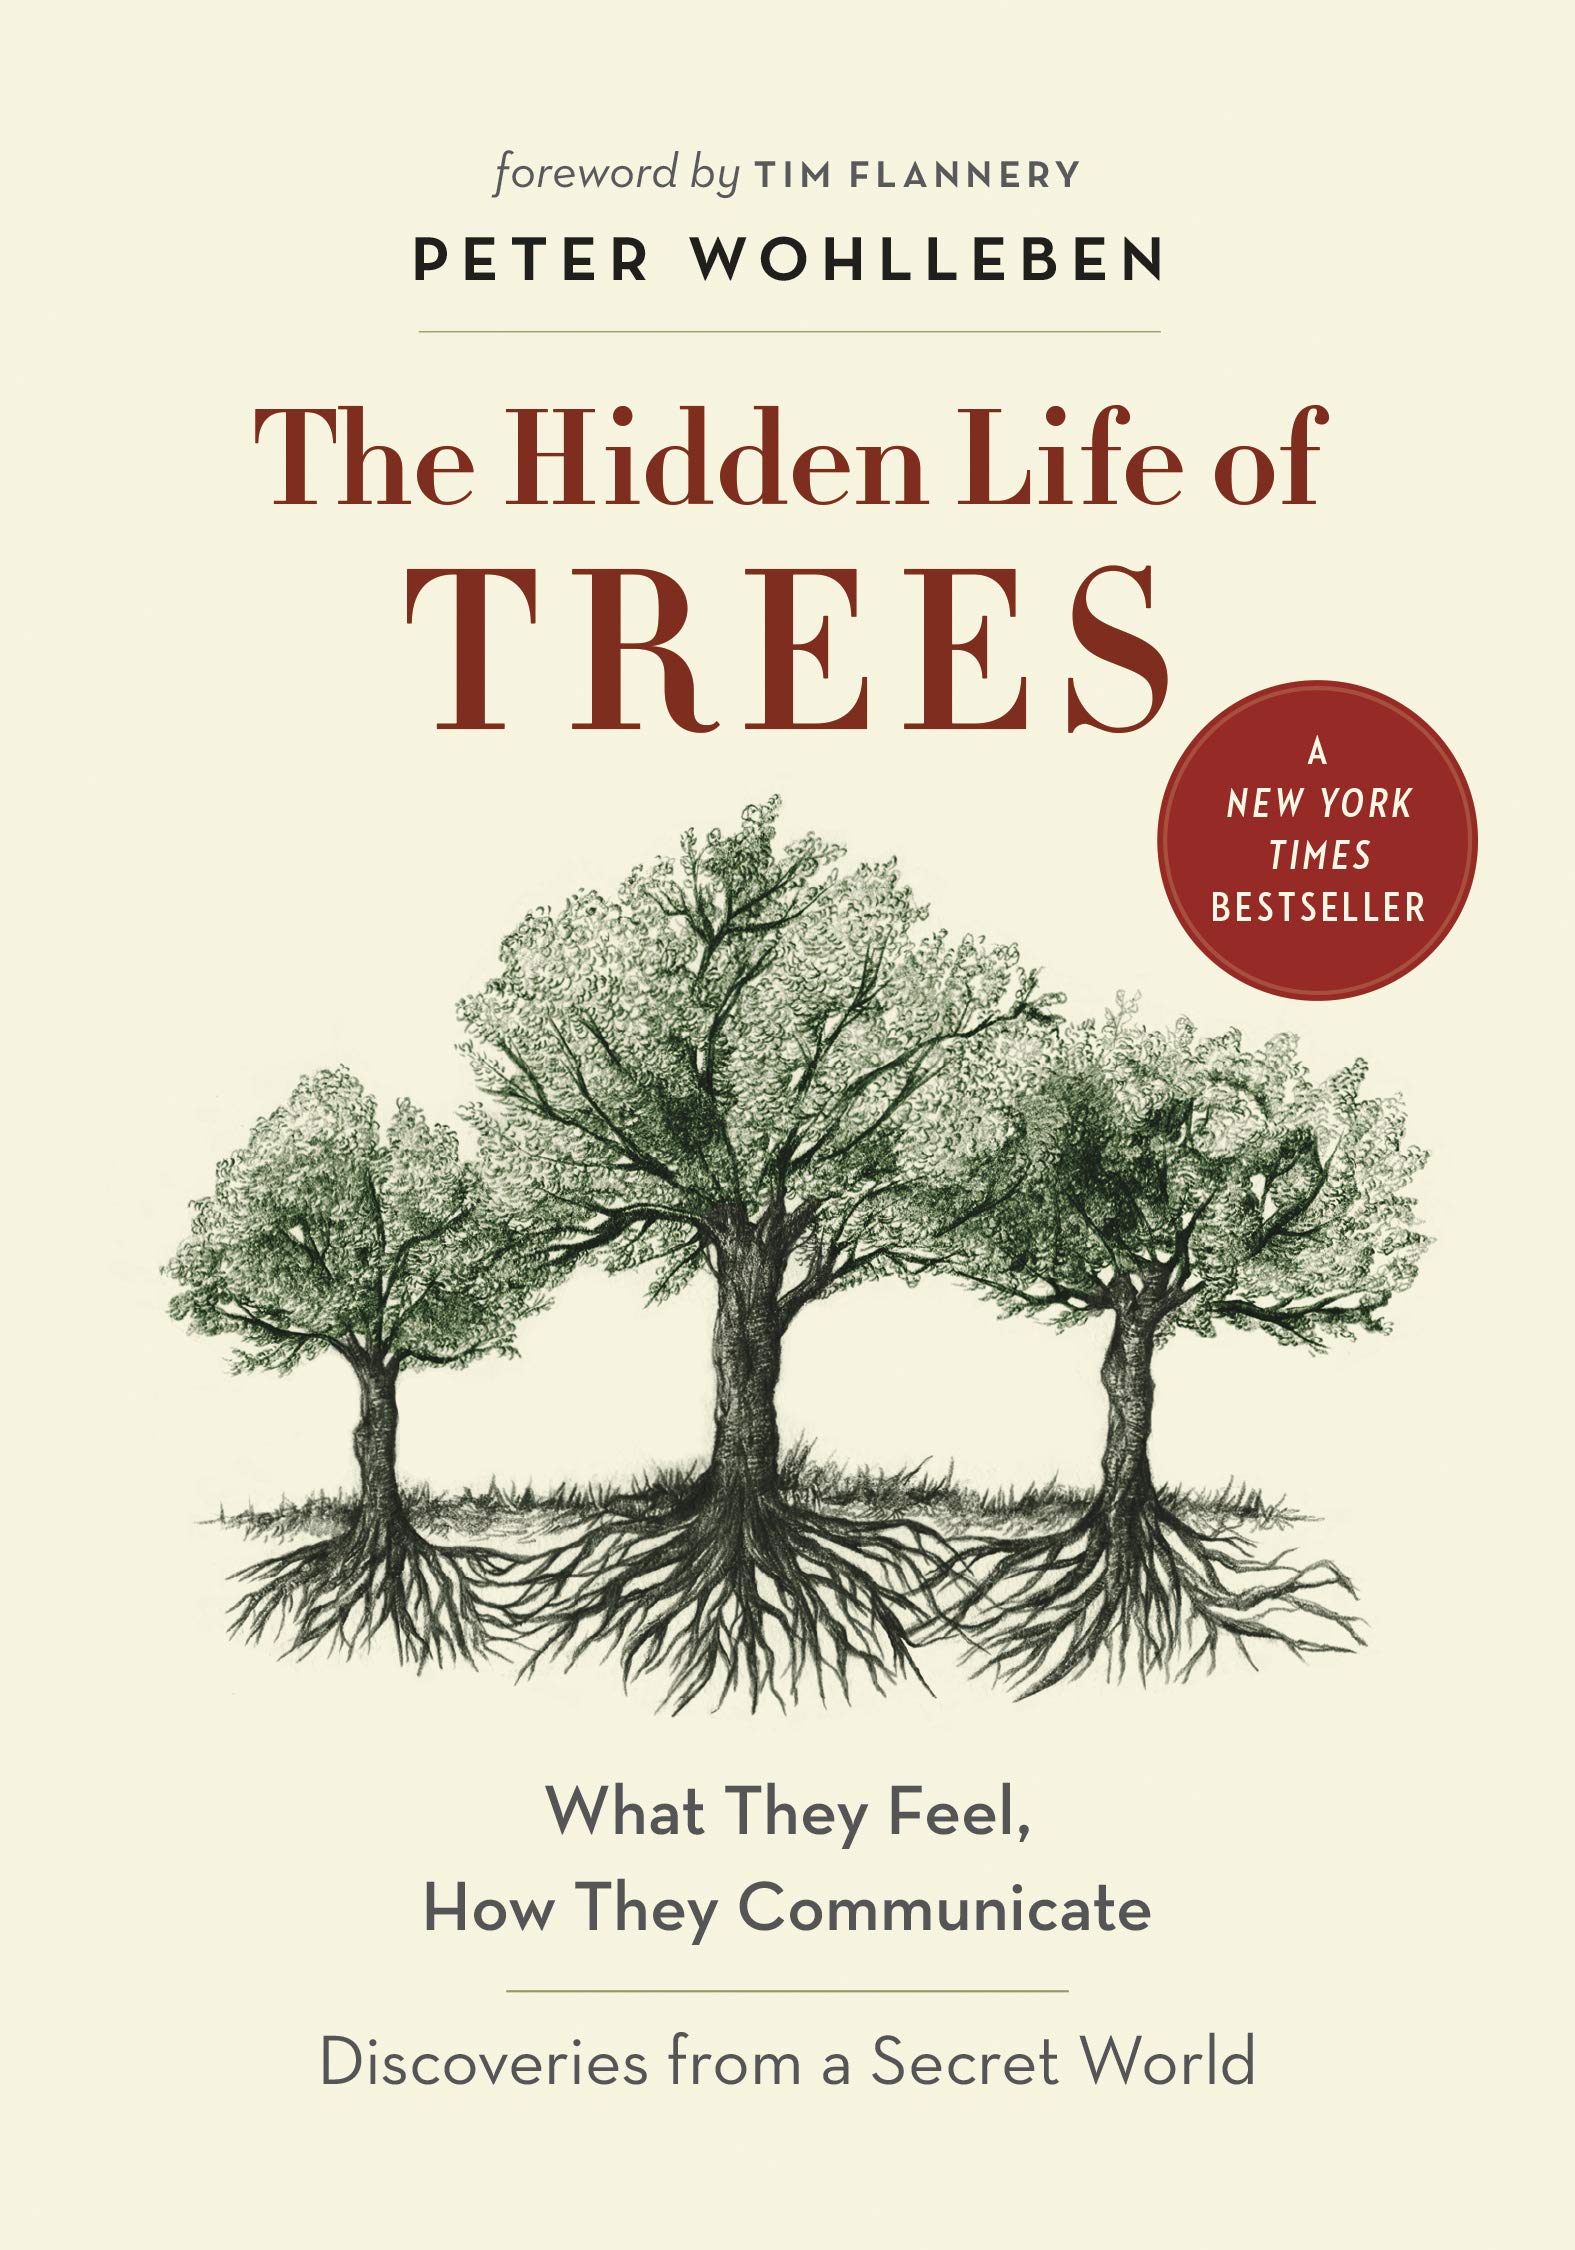 The Hidden Life of Trees: What They Feel, How They Communicate — Discoveries from a Secret World